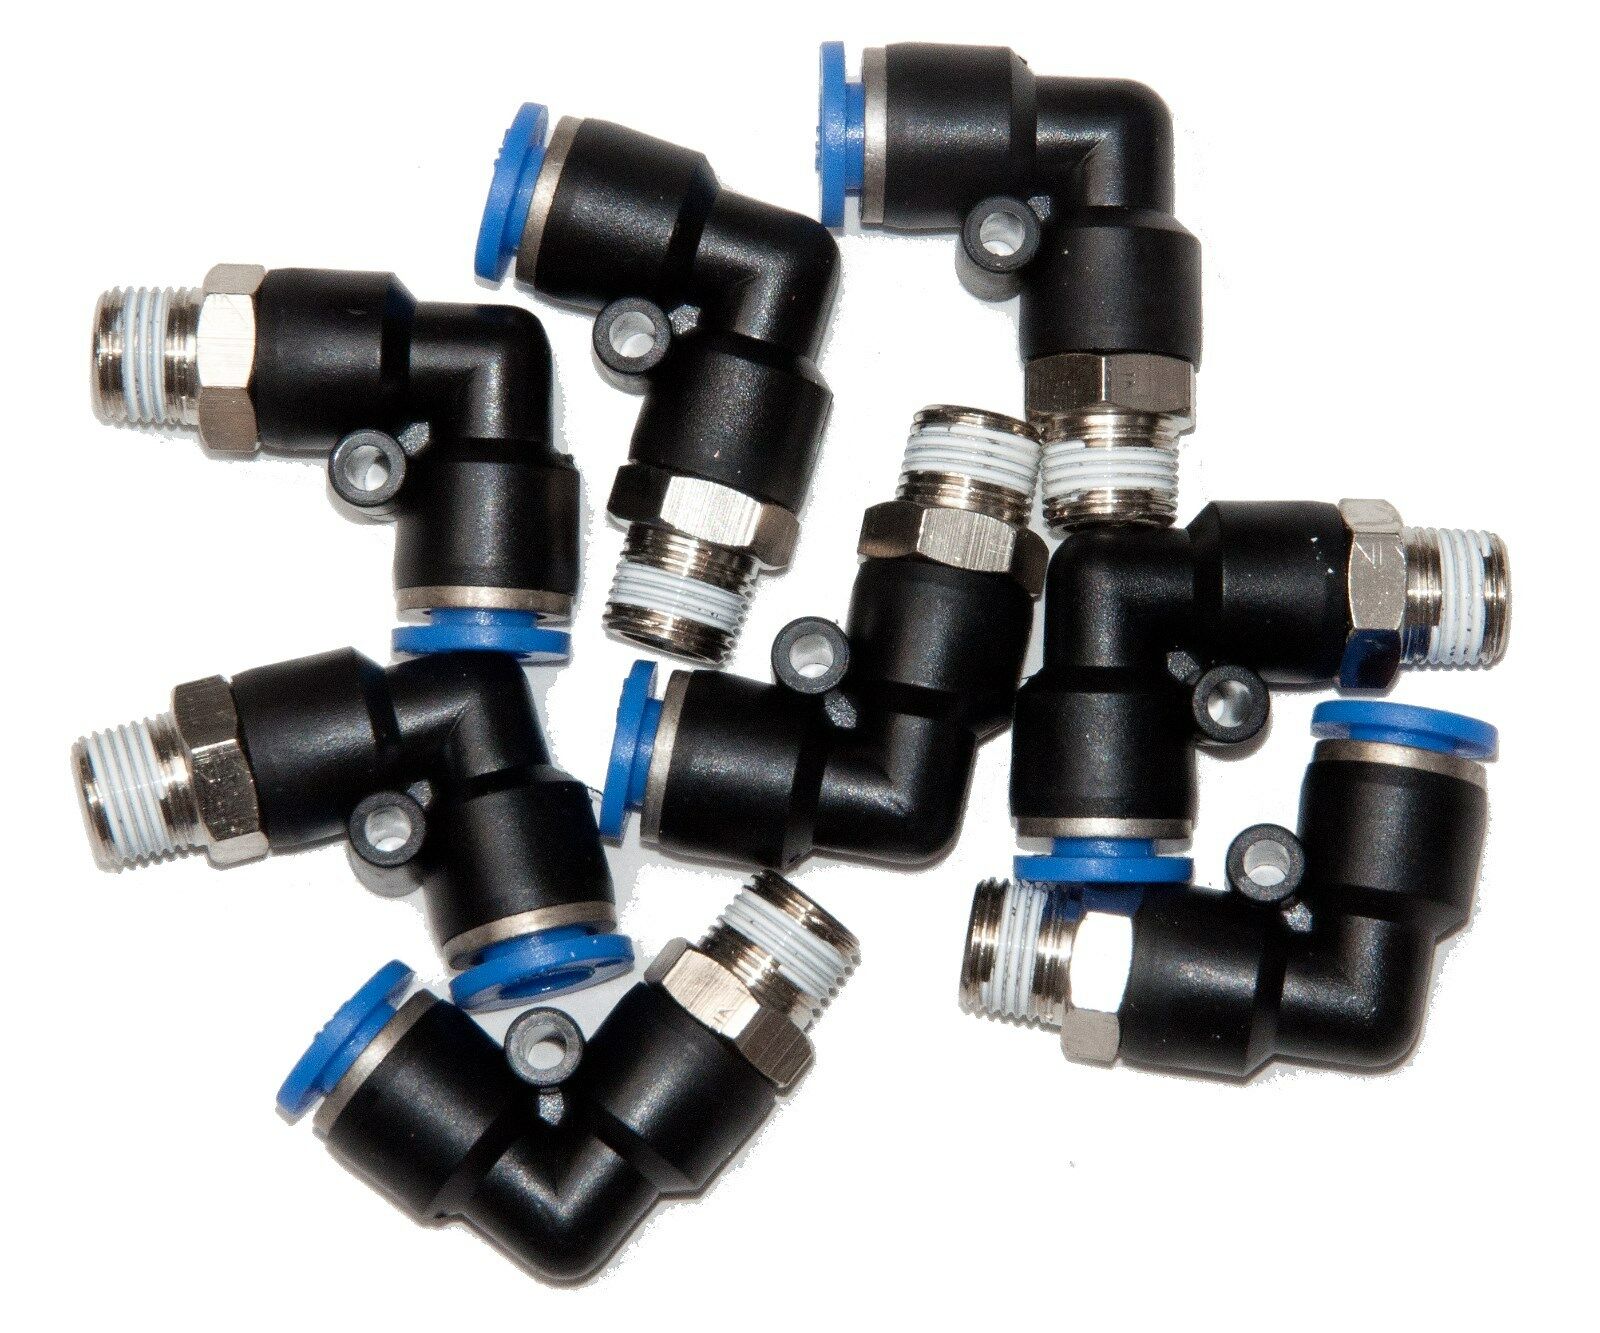 10 Pieces  Pneumatic 1/4" Tube X 1/8" Npt Male Swivel L Push To Connect  Fitting